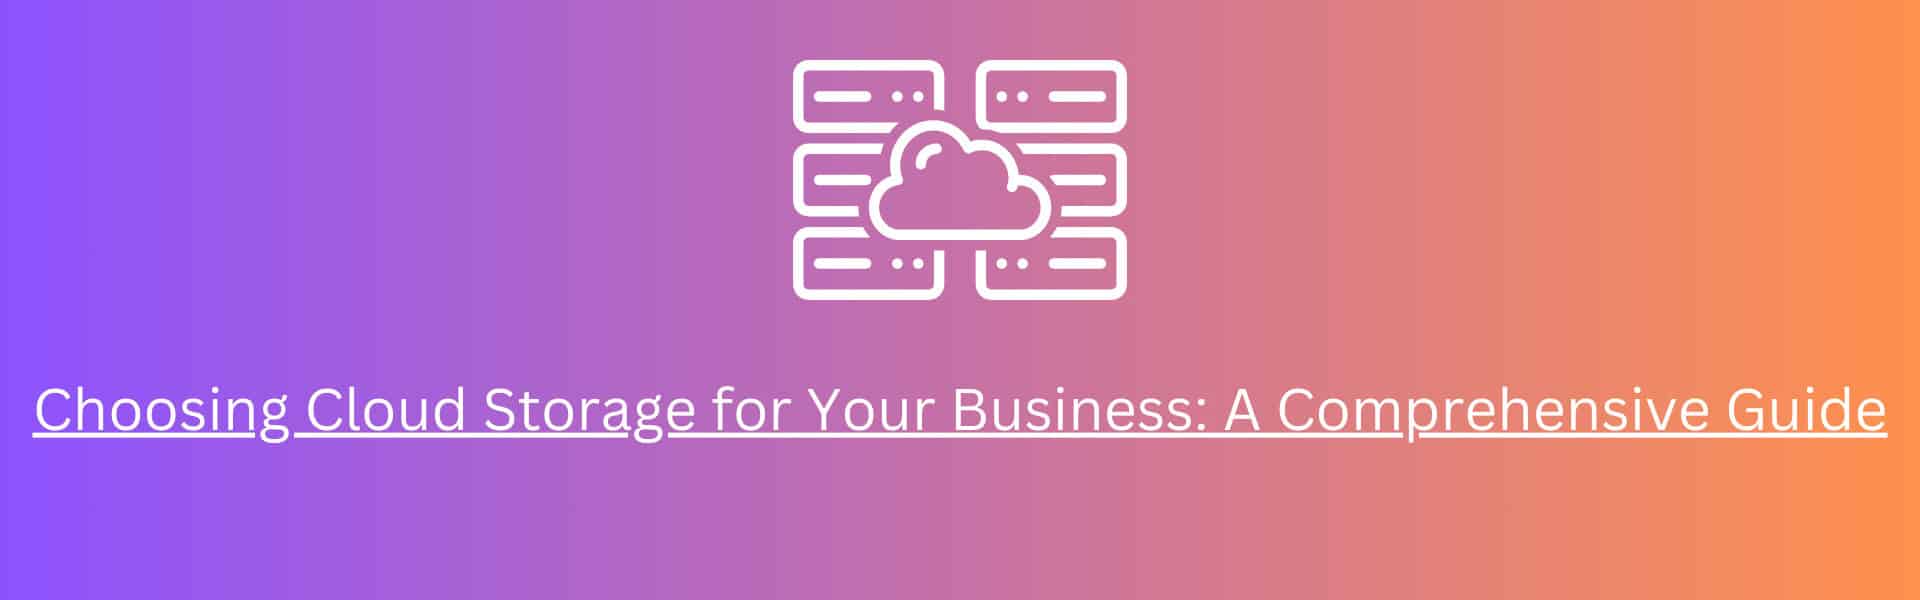 Choosing Cloud Storage for Your Business A Comprehensive Guide